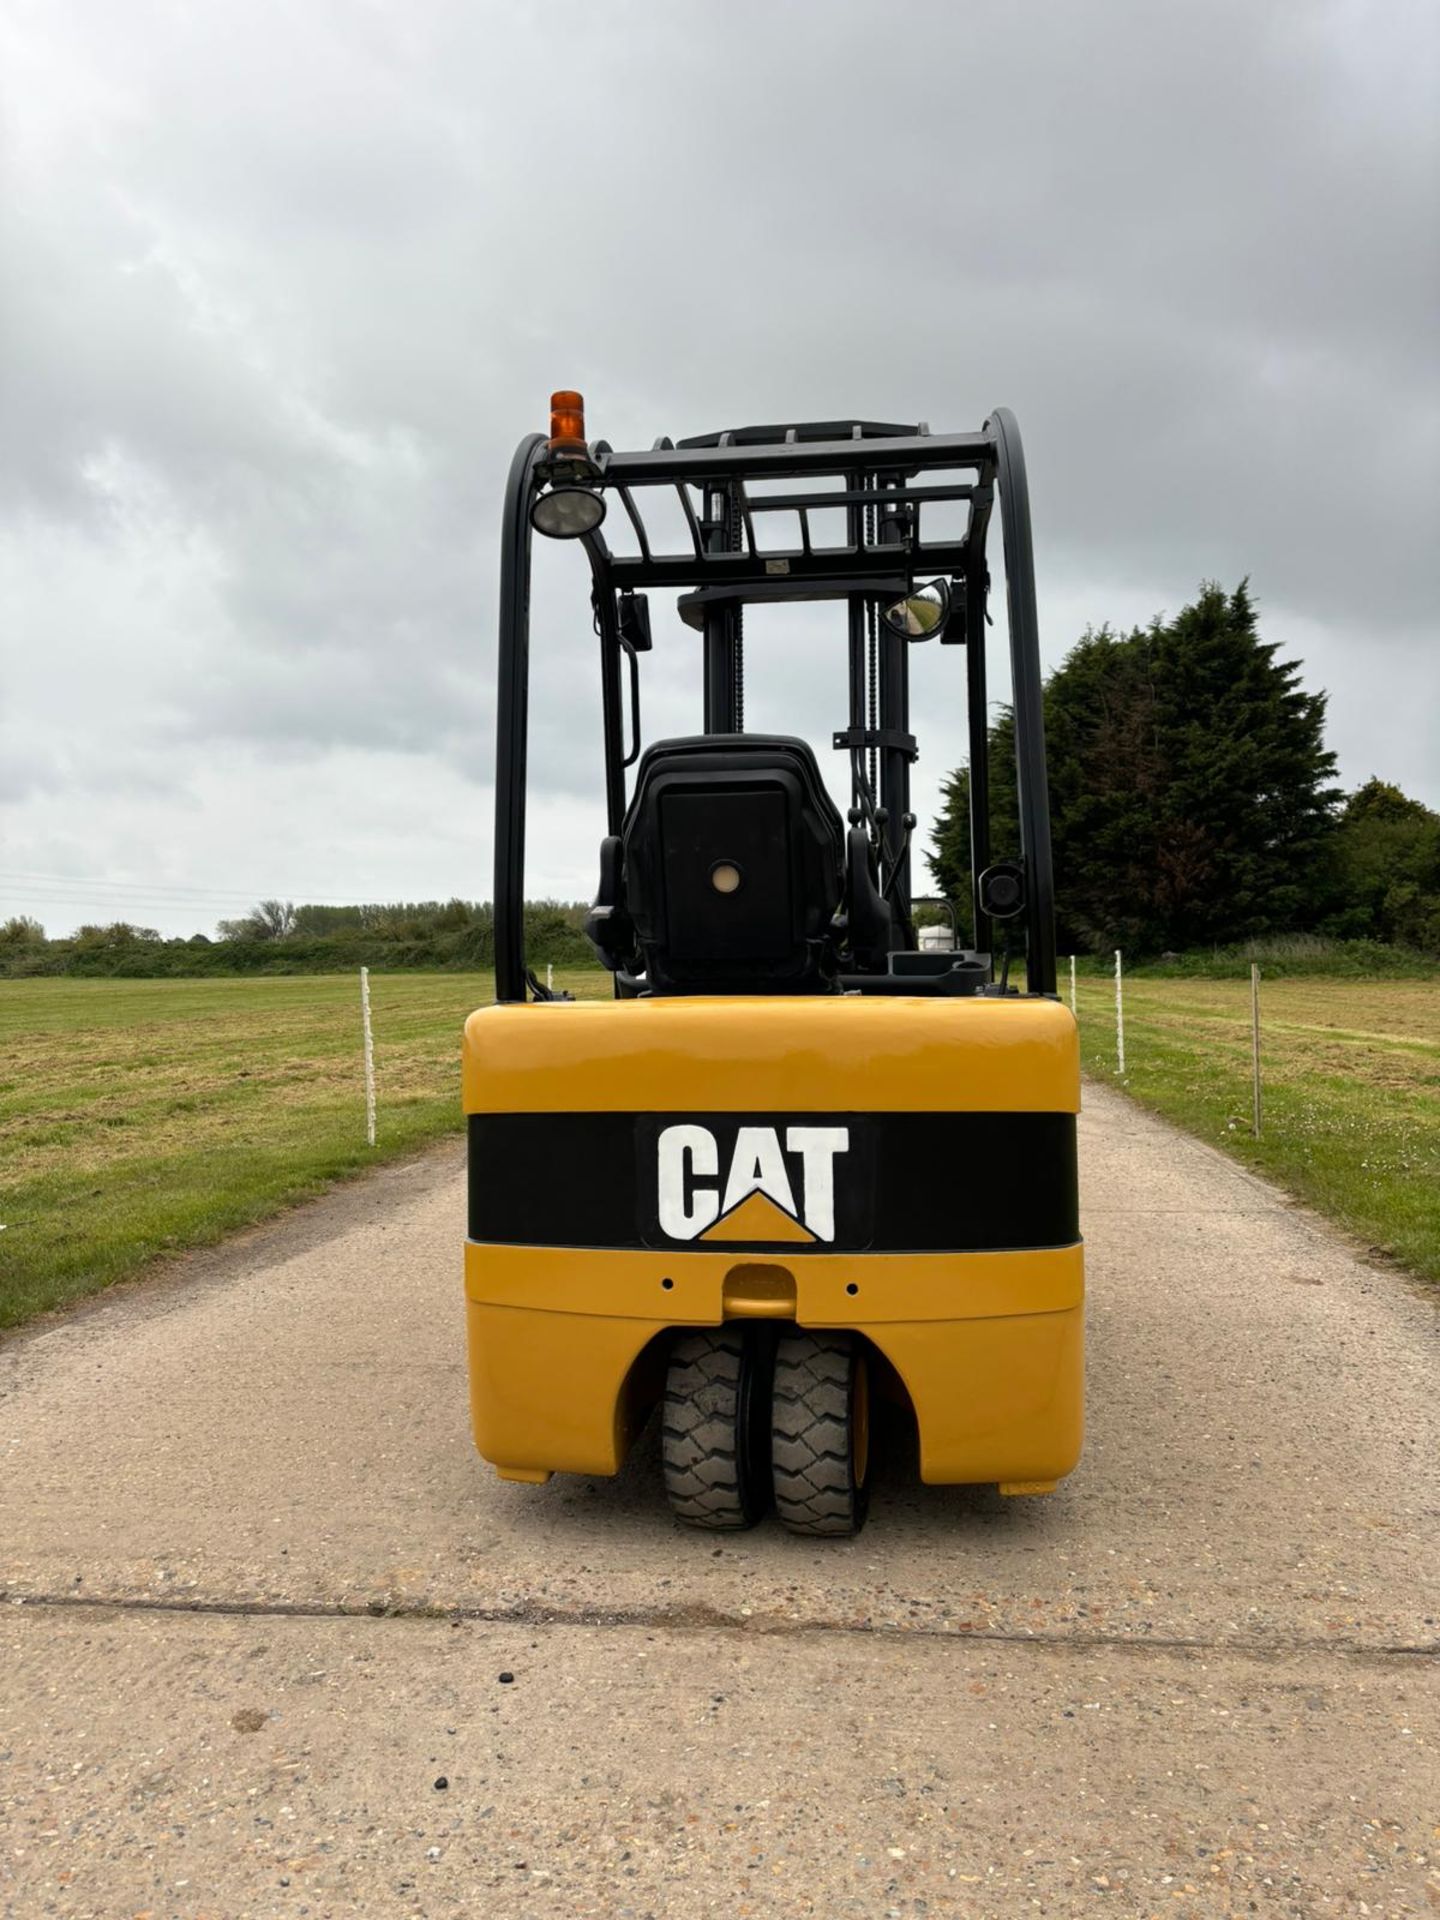 2011, CATERPILLAR - Electric Forklift Truck - Image 2 of 8